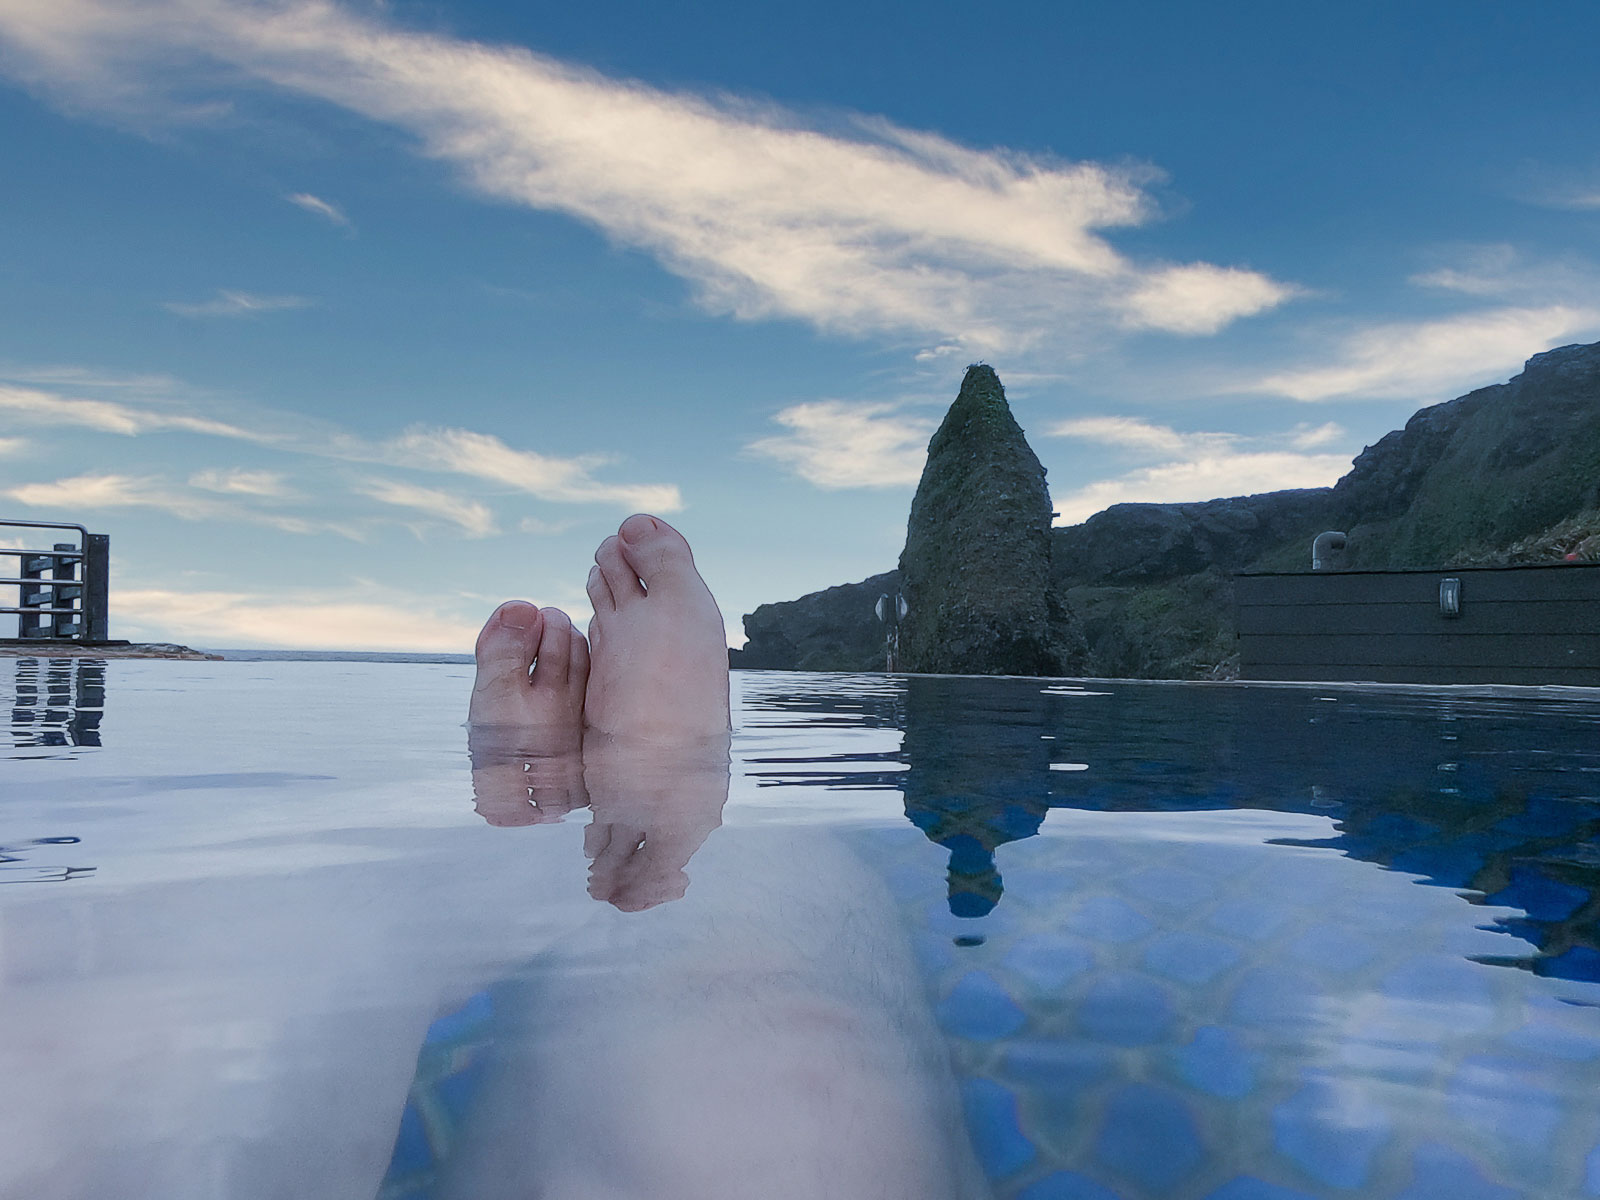 A first-person view from within the hot spring, a bather's feet emerge from the water and Green Island's coastal mountains can be seen in the background.